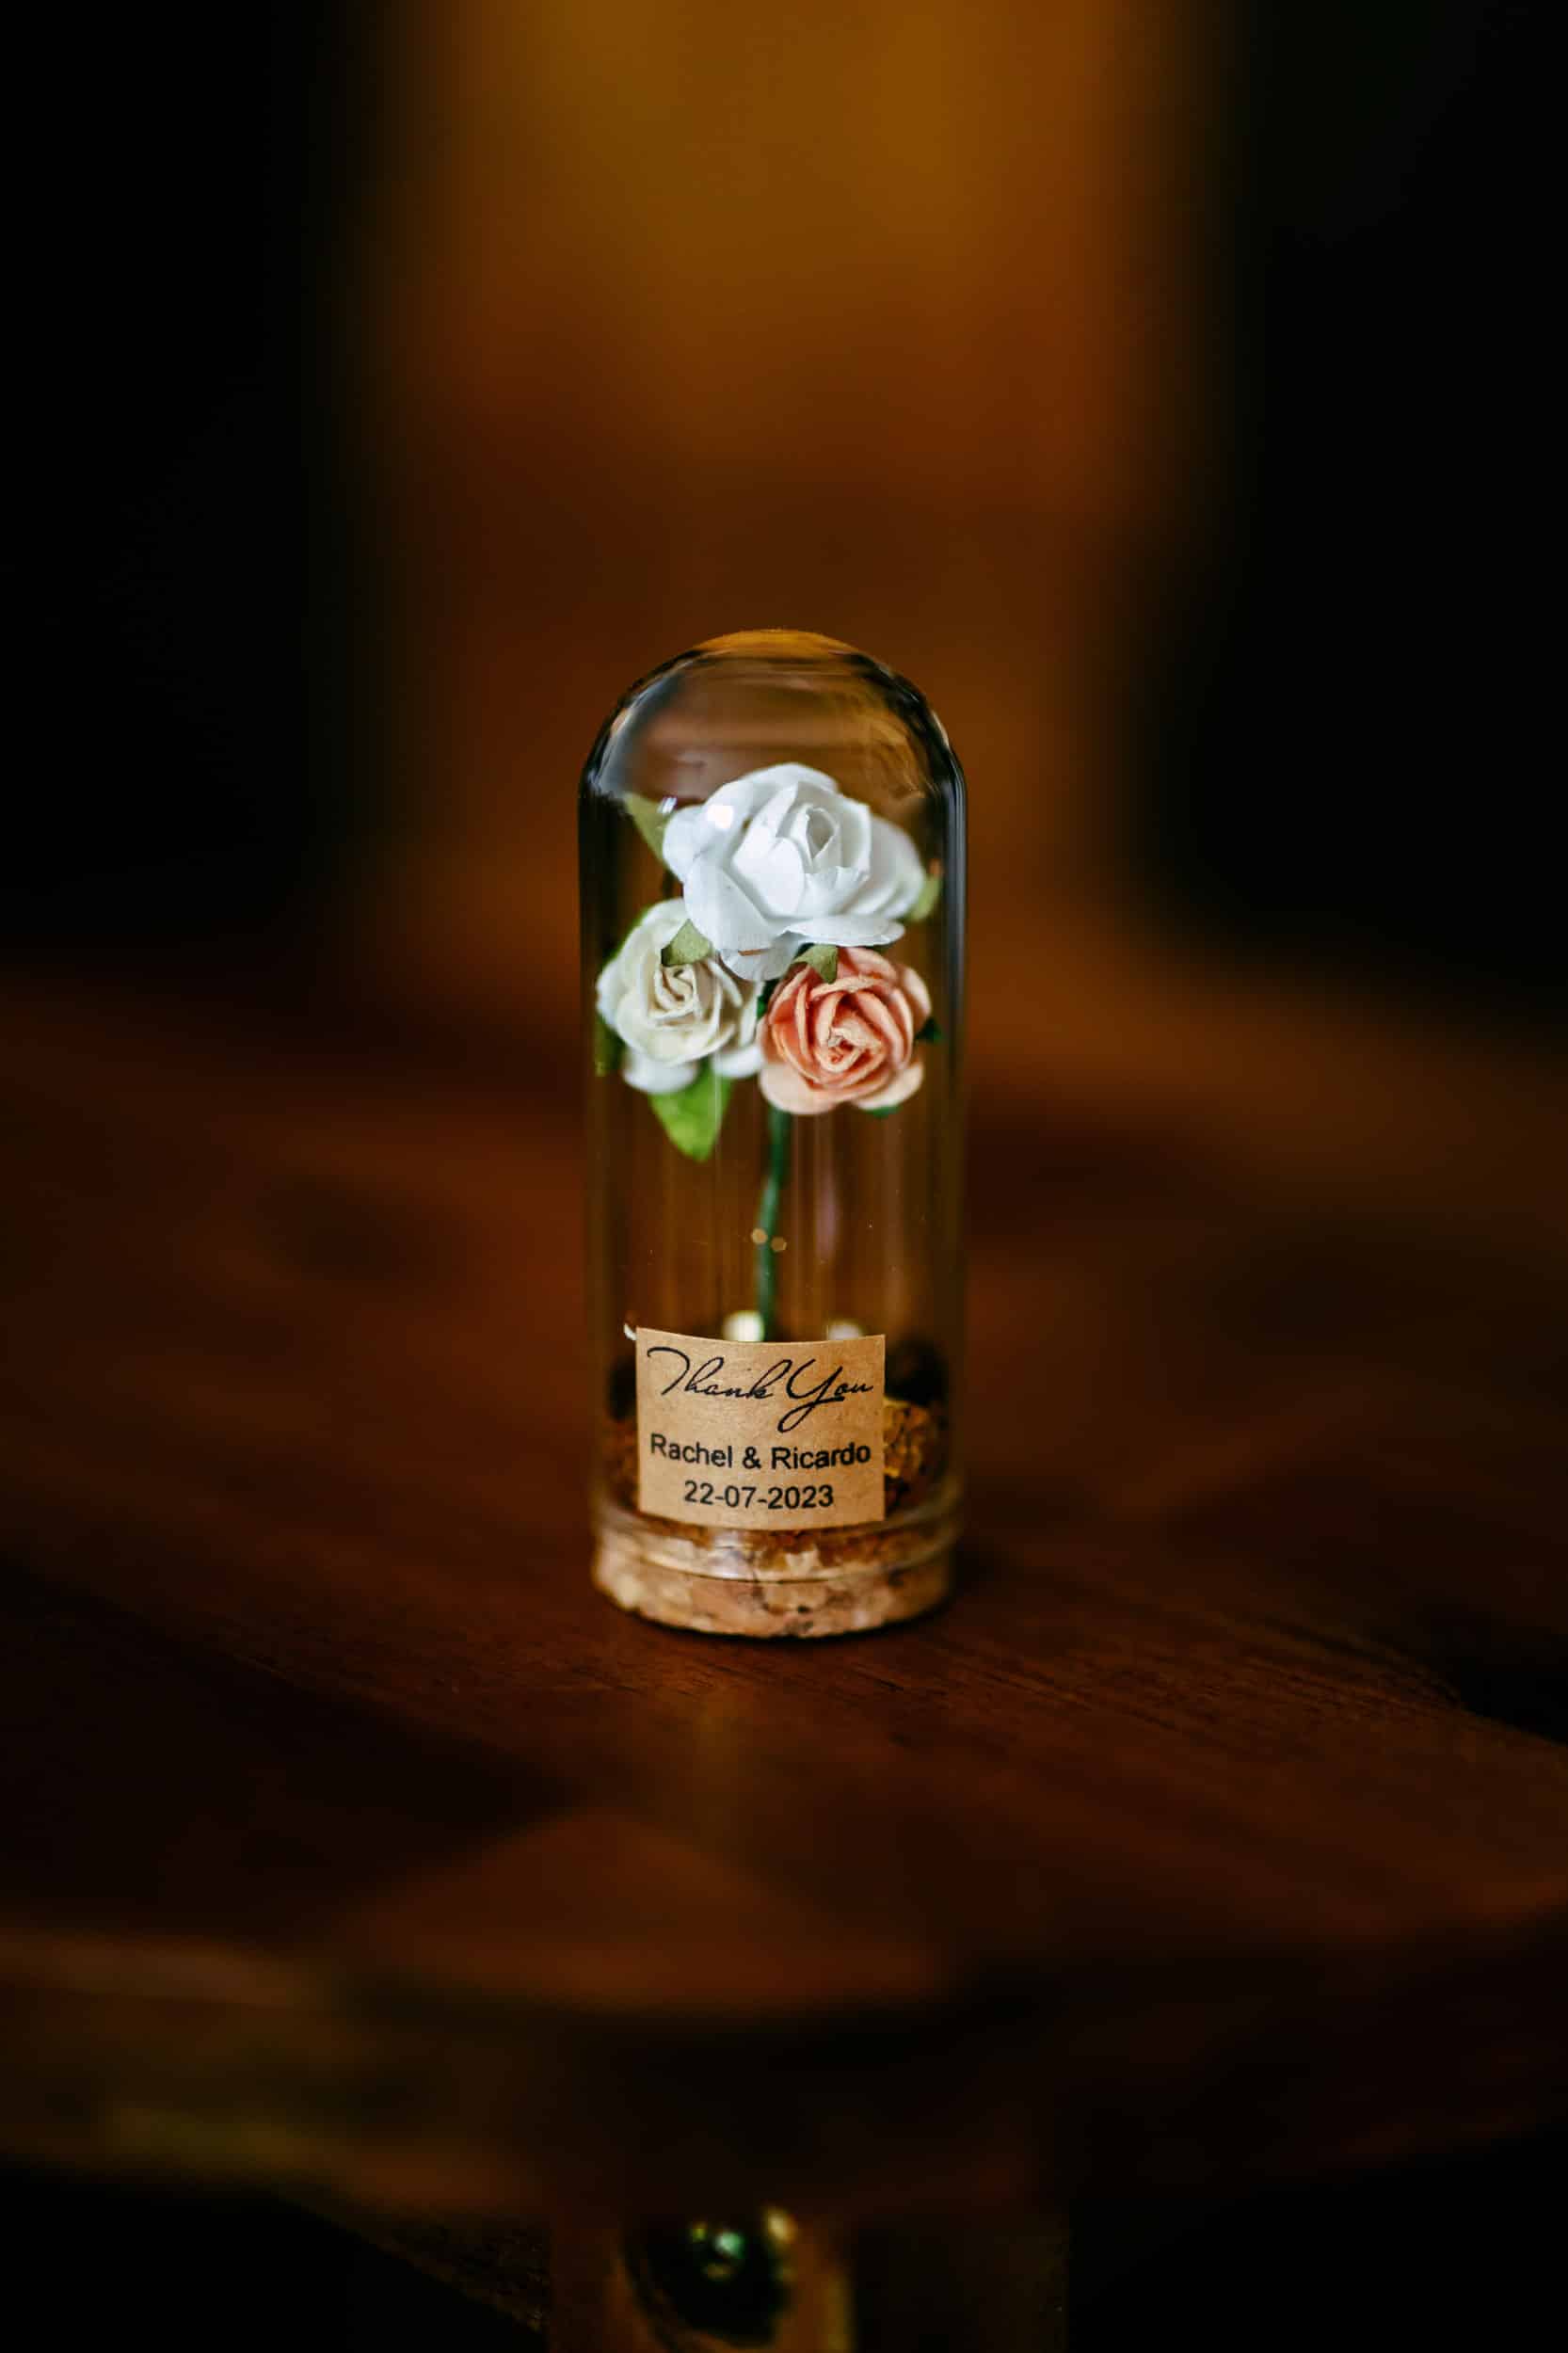 A rose in a glass bottle on a wooden table, serving as a charming and elegant thank-you to beloved guests.